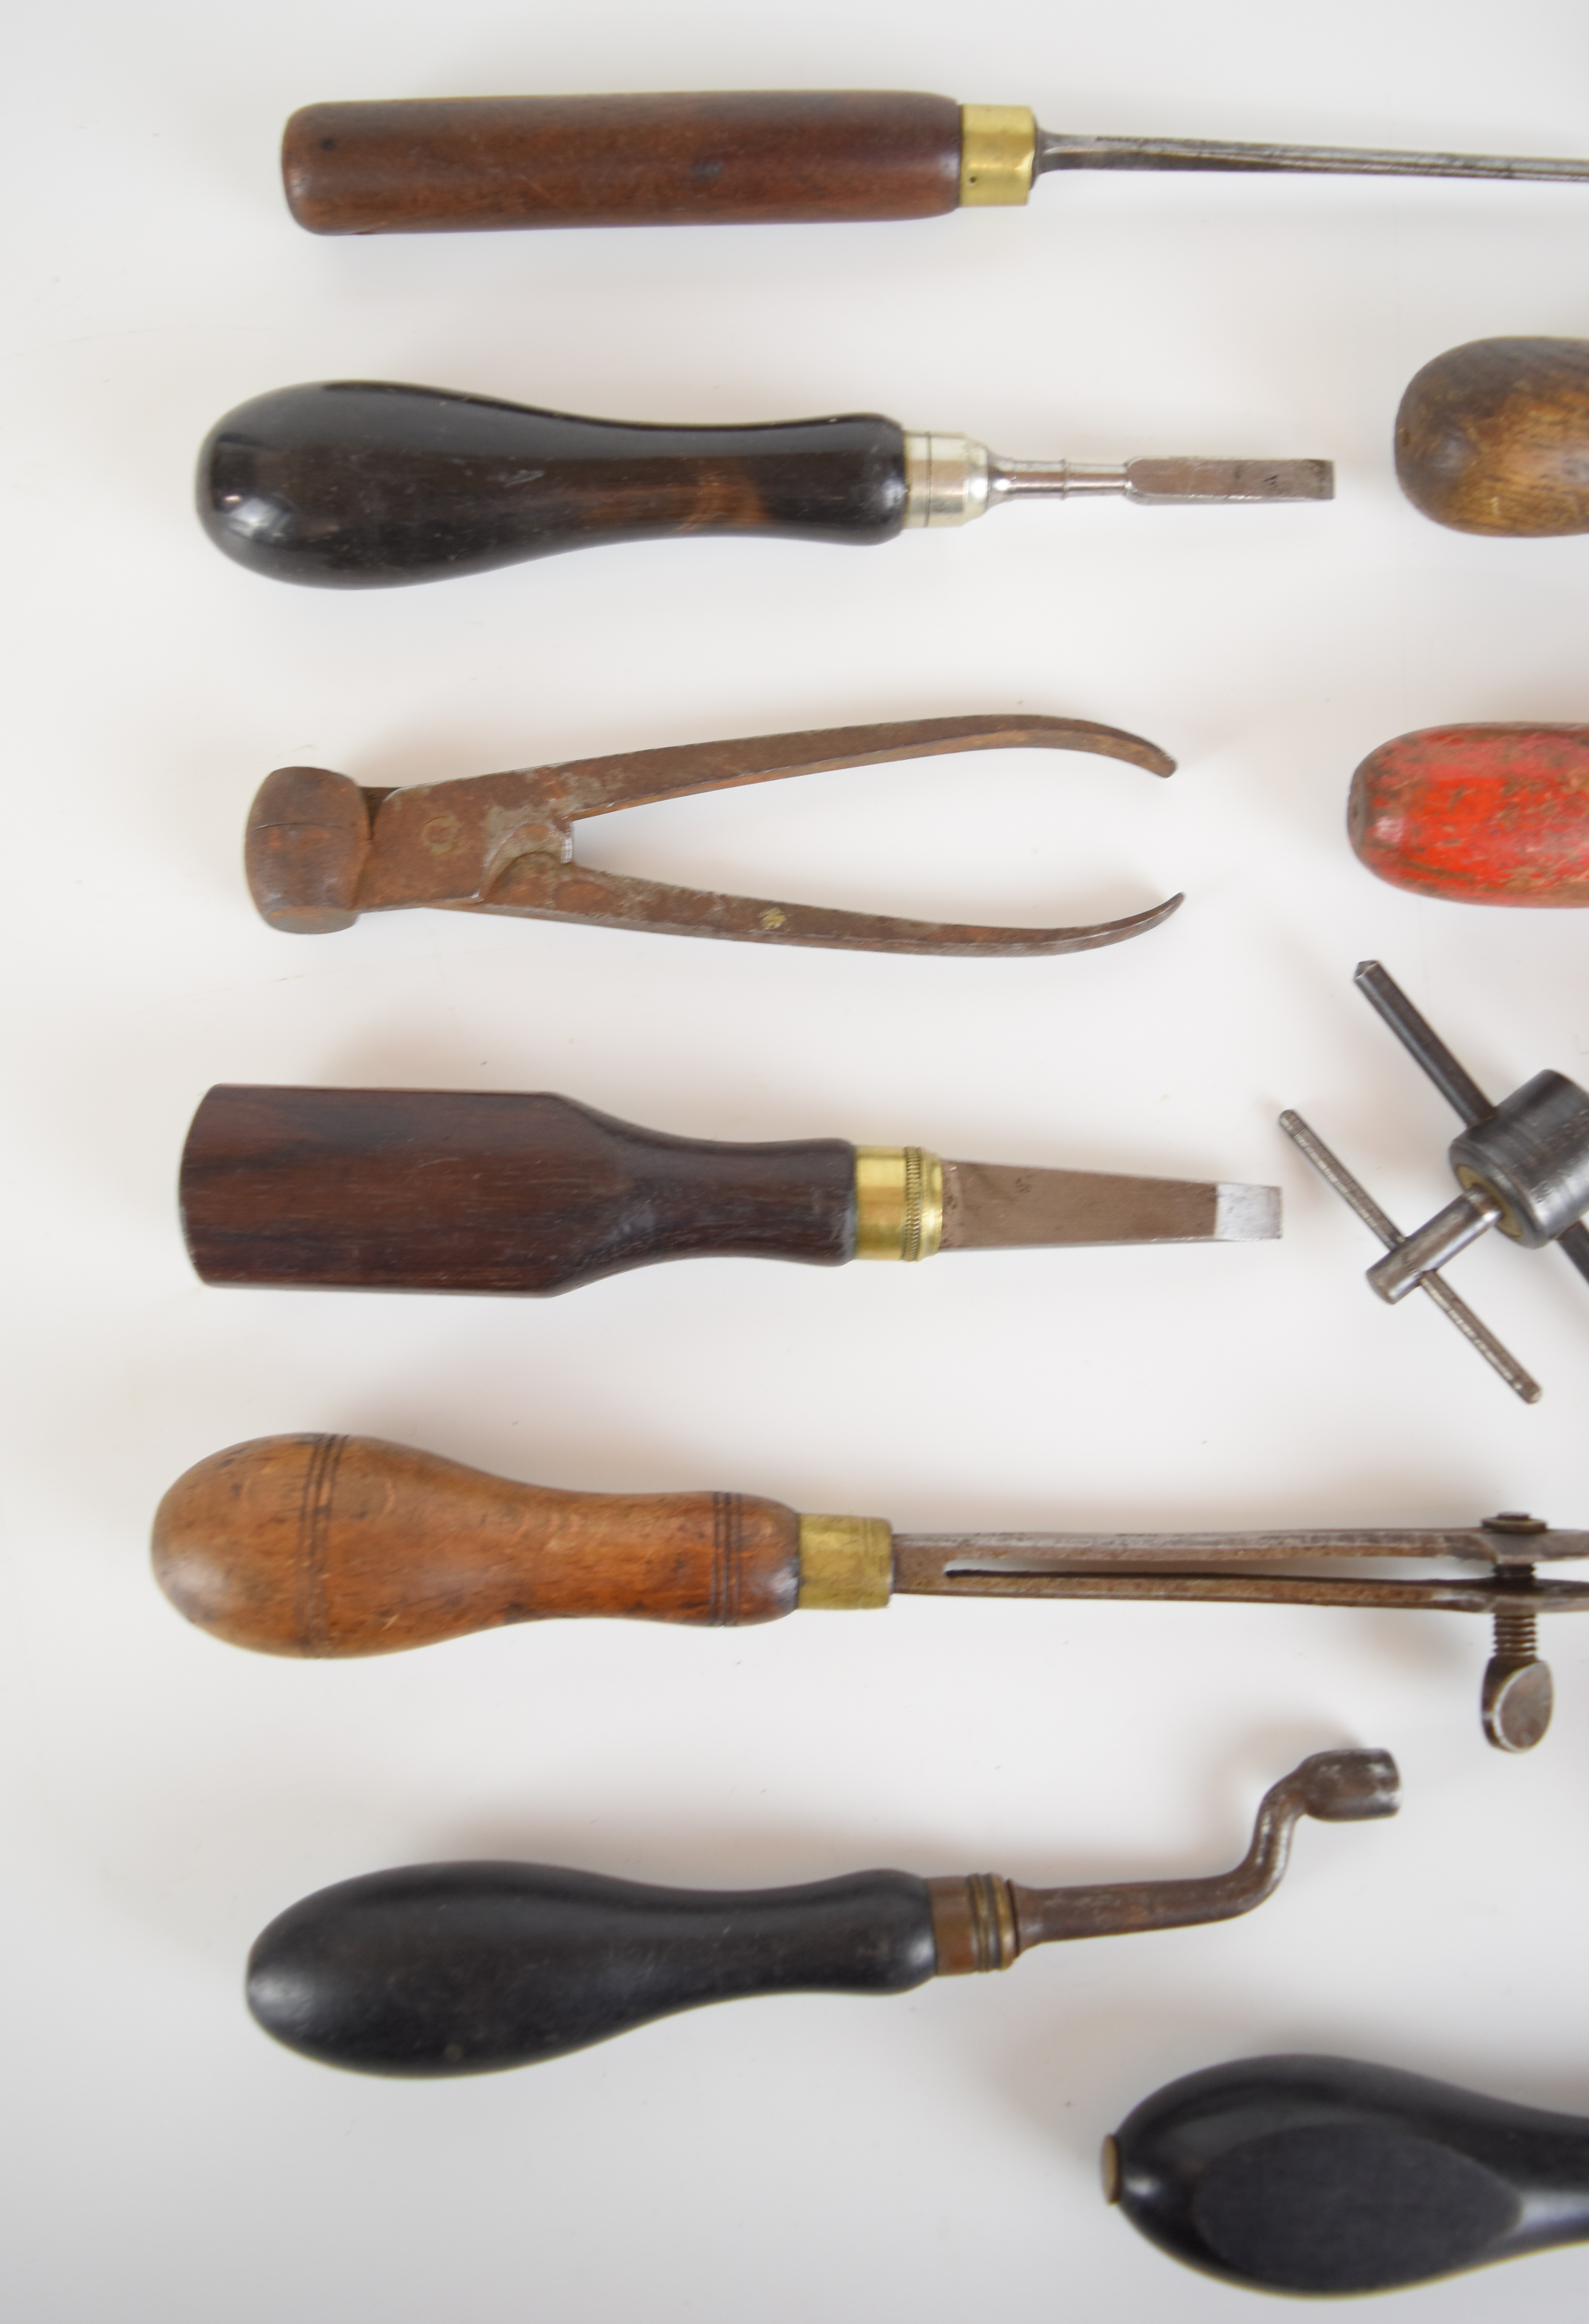 Fourteen vintage gun or gunsmith tools including screwdrivers, bullet moulds, chequering tools, - Image 2 of 3